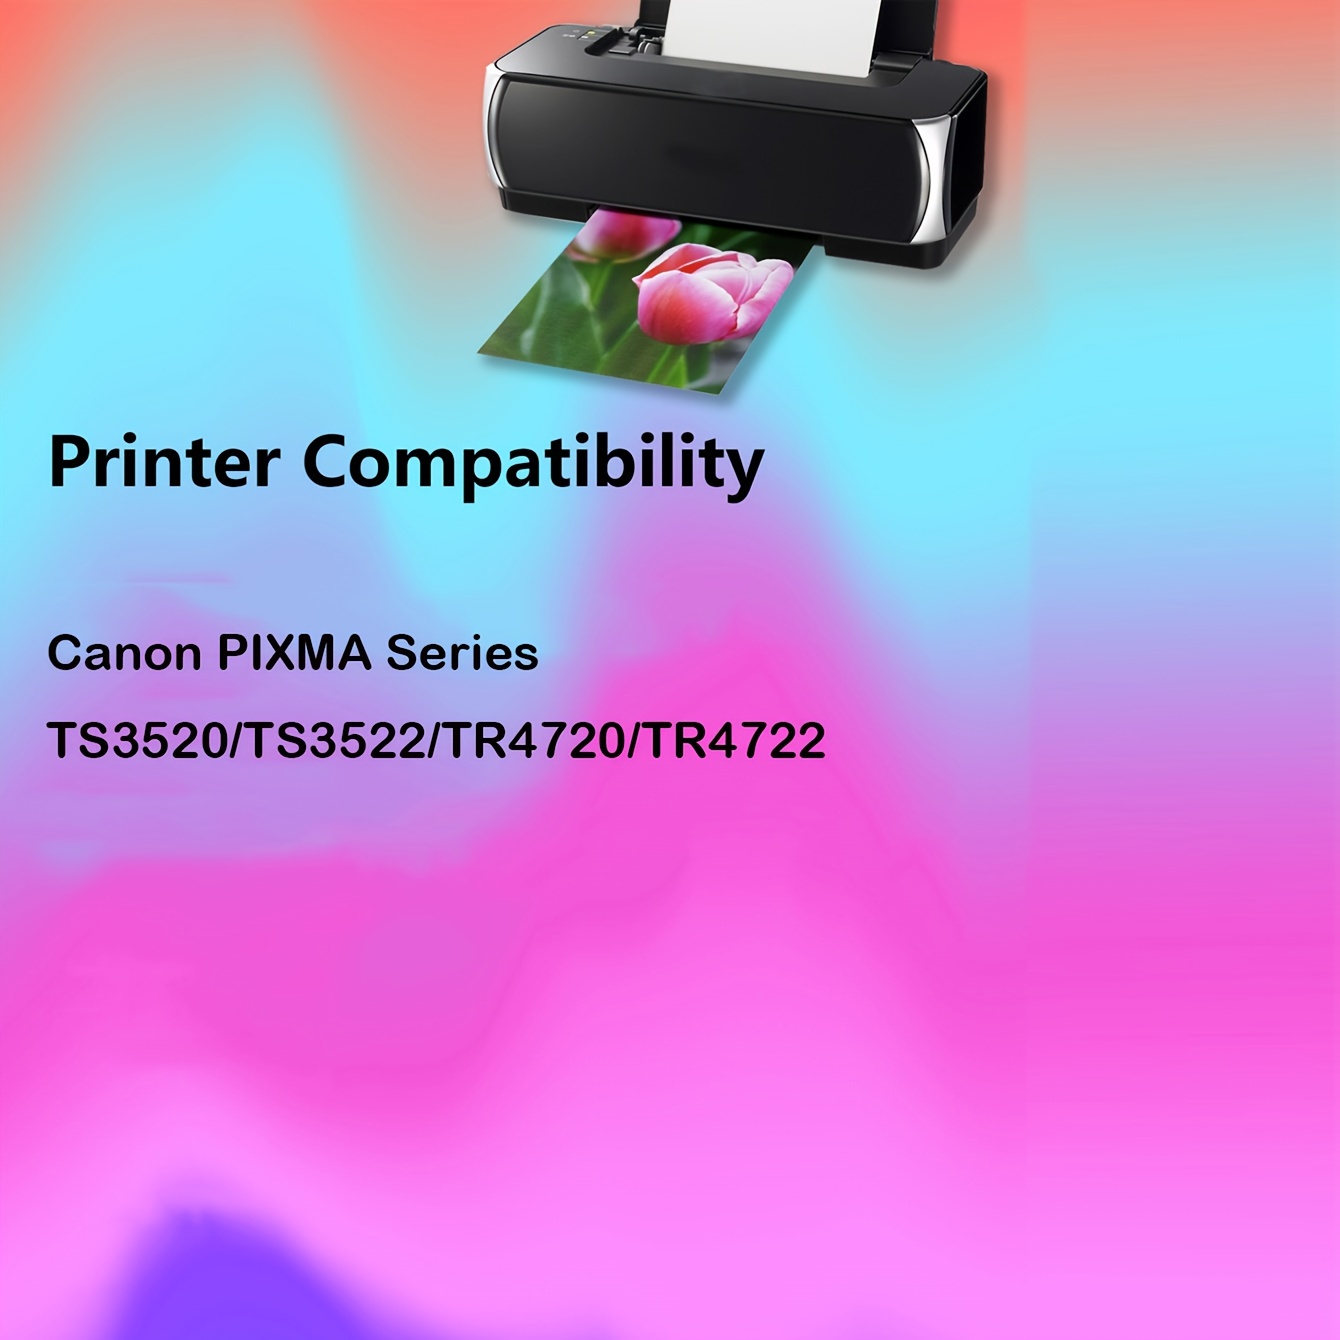 Canon Multicolor Ink for Printer PG-275 XL / CL-276 XL Compatible to PIXMA  TS3520, TS3522 and TR4720 Printers